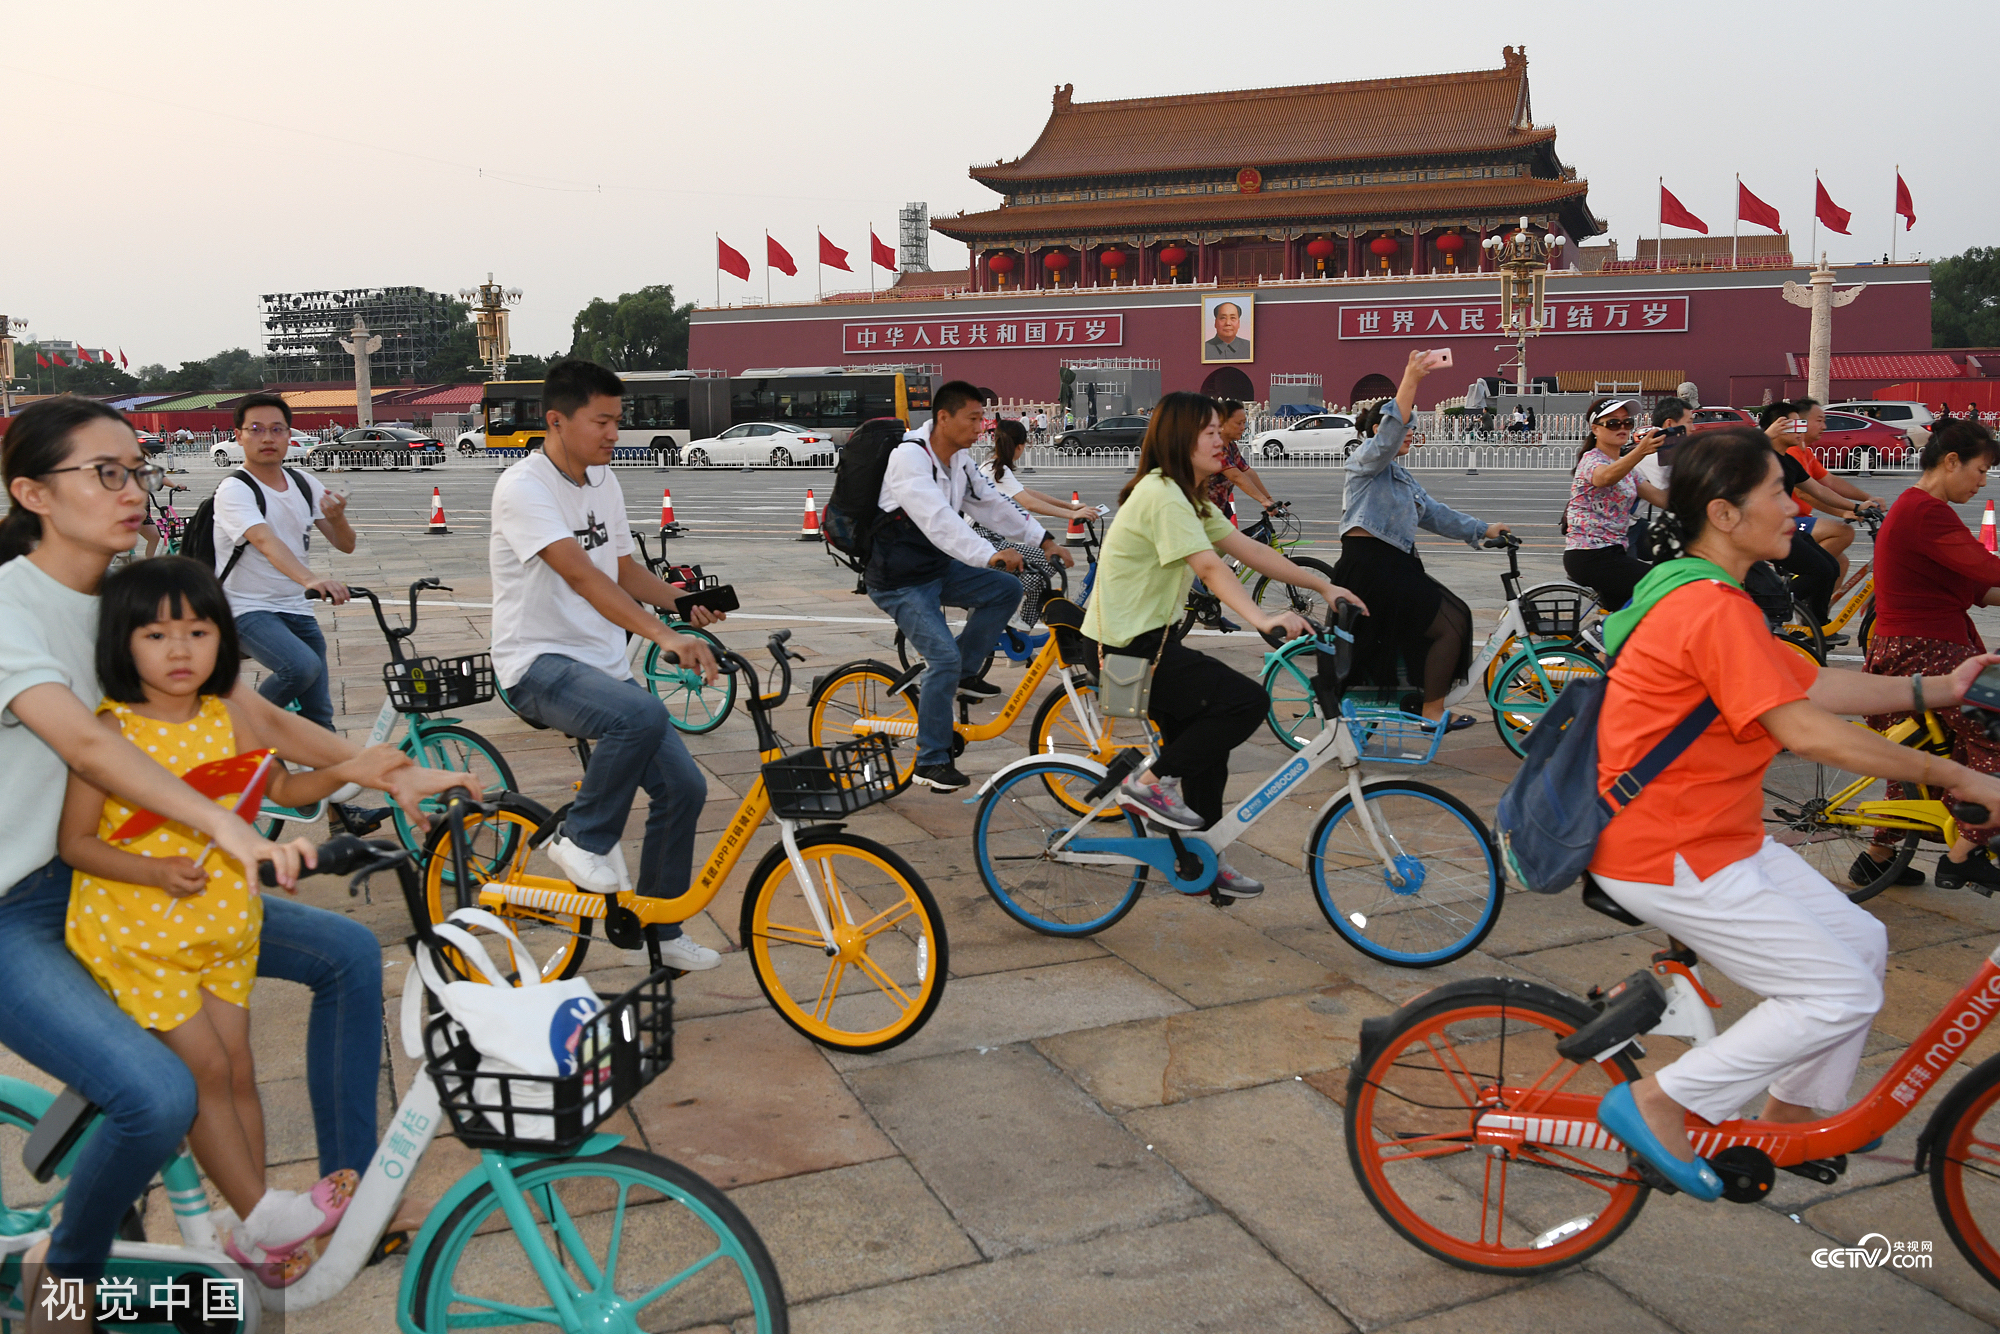 Chinese commuters ride bicycles passing through the Tian’anmen Square in Beijing on a September morning in 2019.